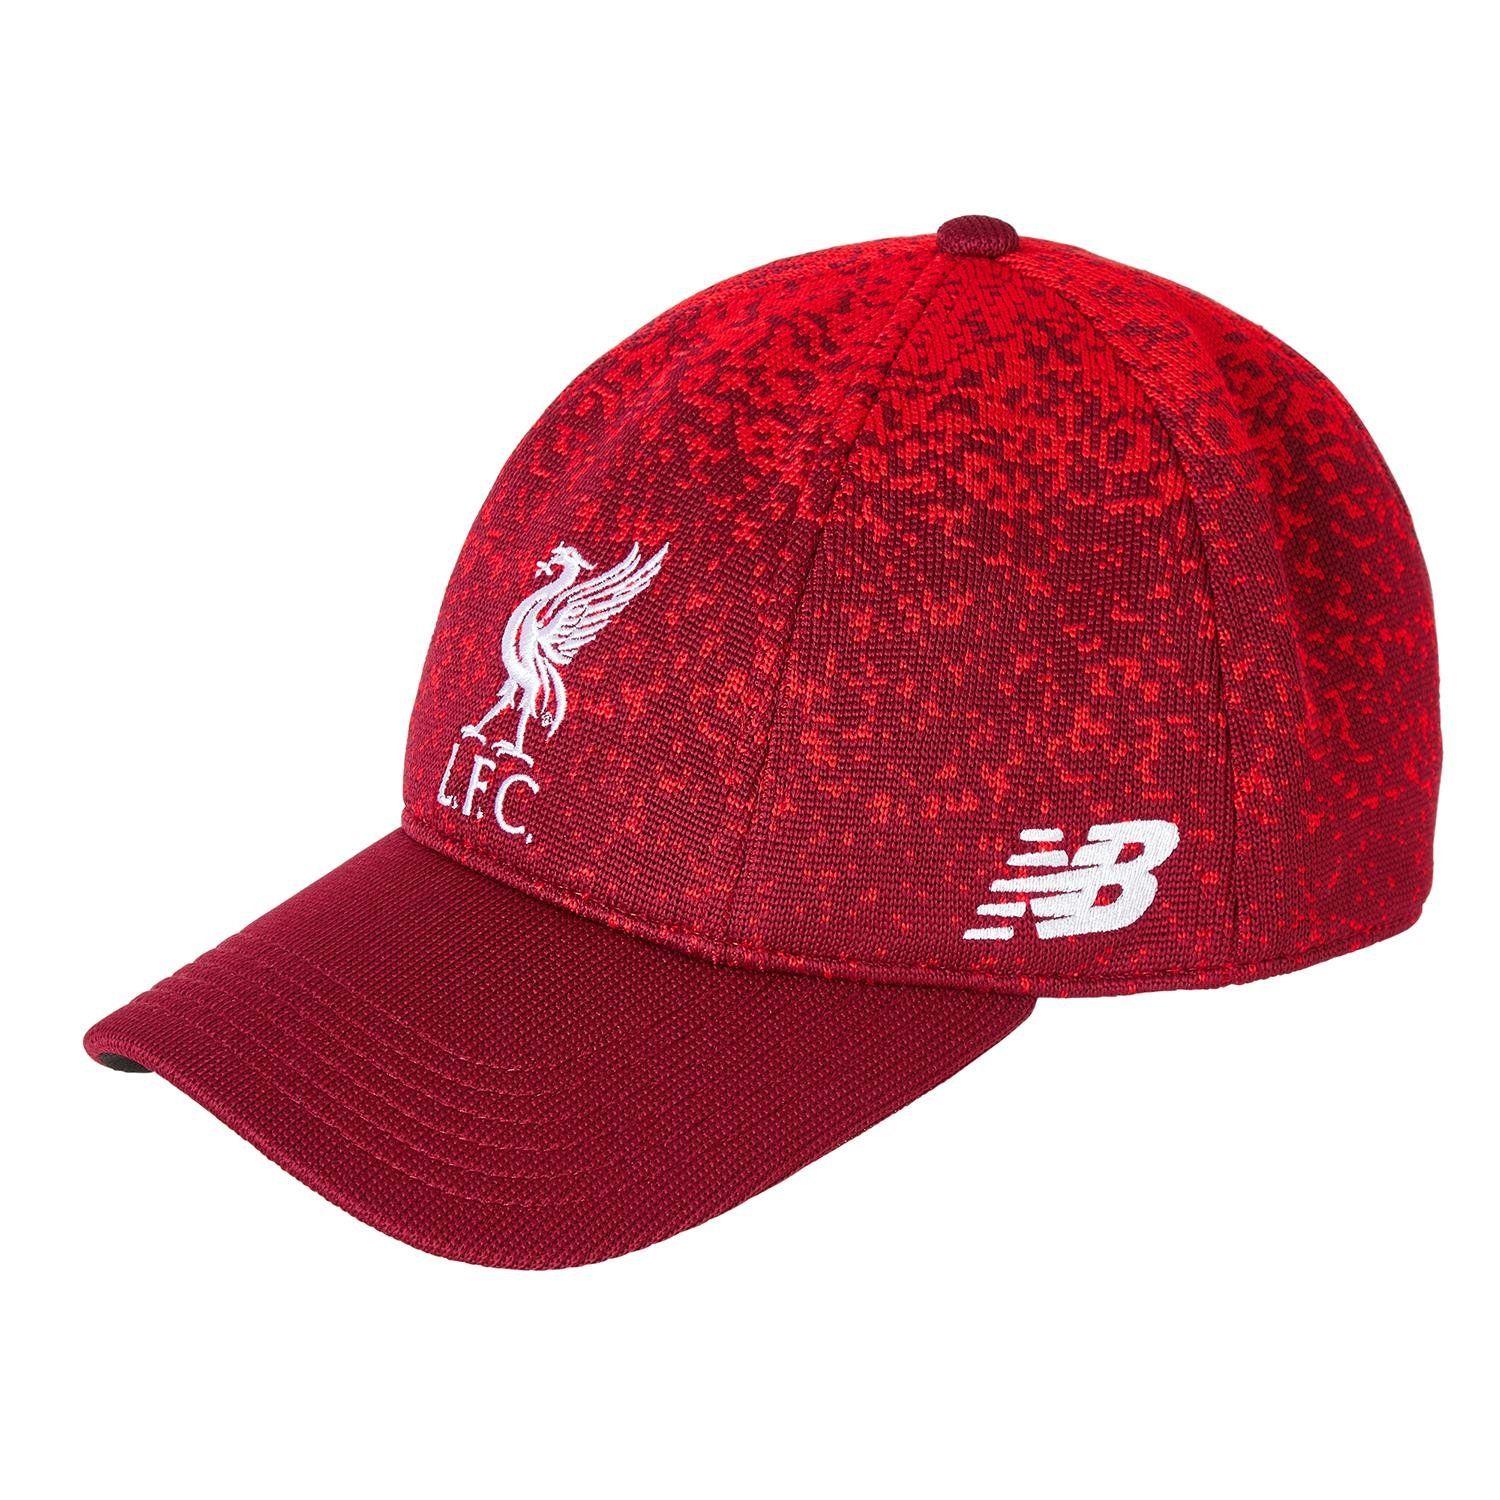 Red NB Logo - New Balance Liverpool FC Marl Red NB Klopp Cap LFC Official Store ...